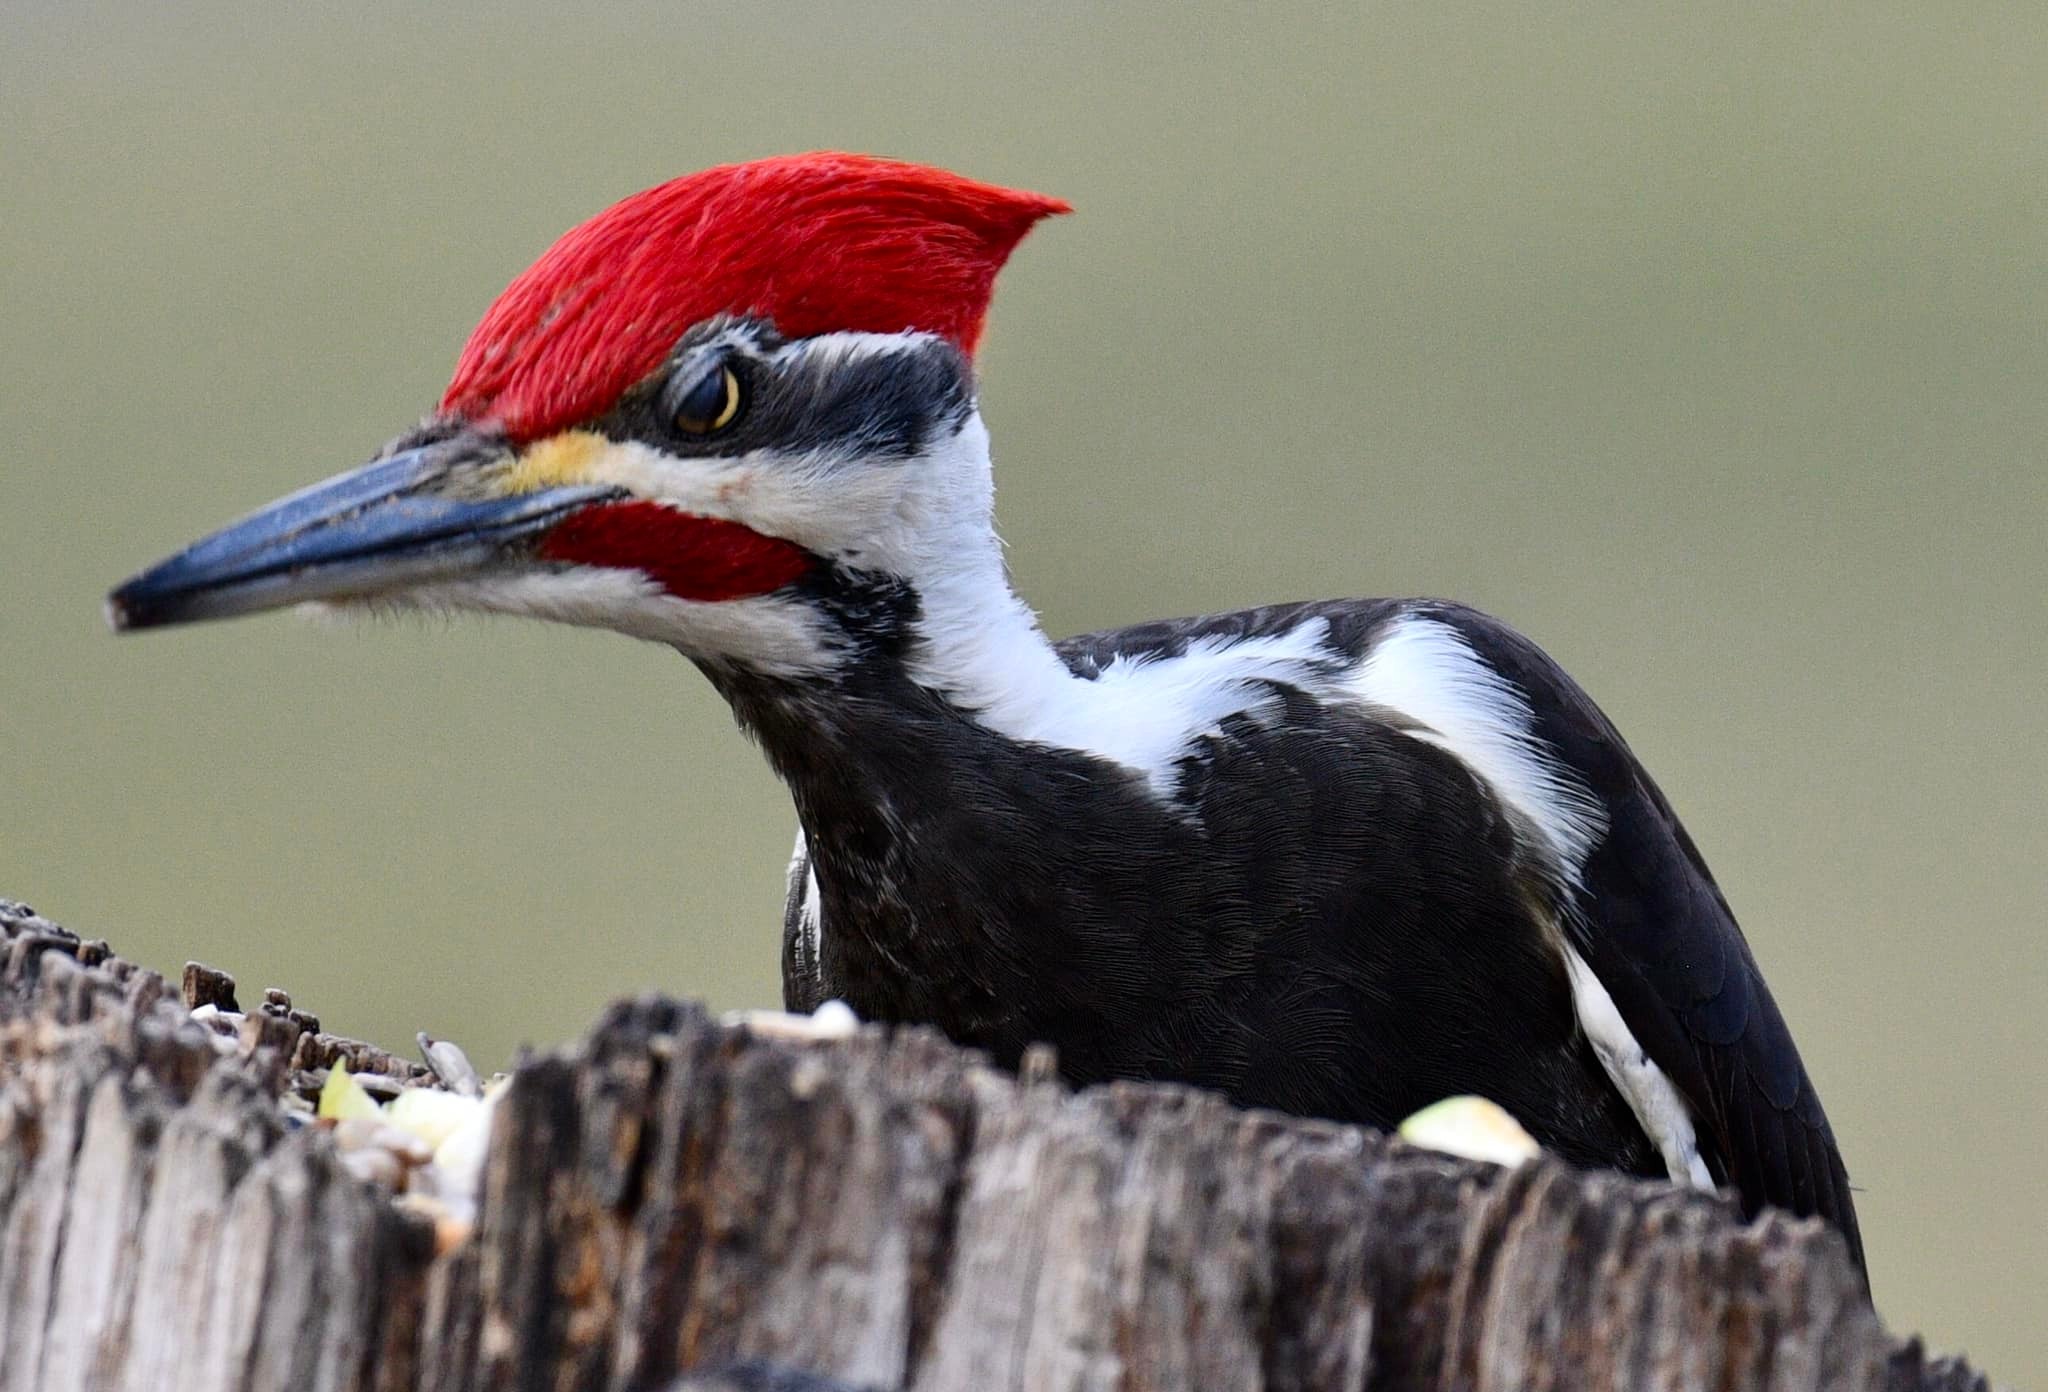 Pileated Woodpecker, by Denise Booher